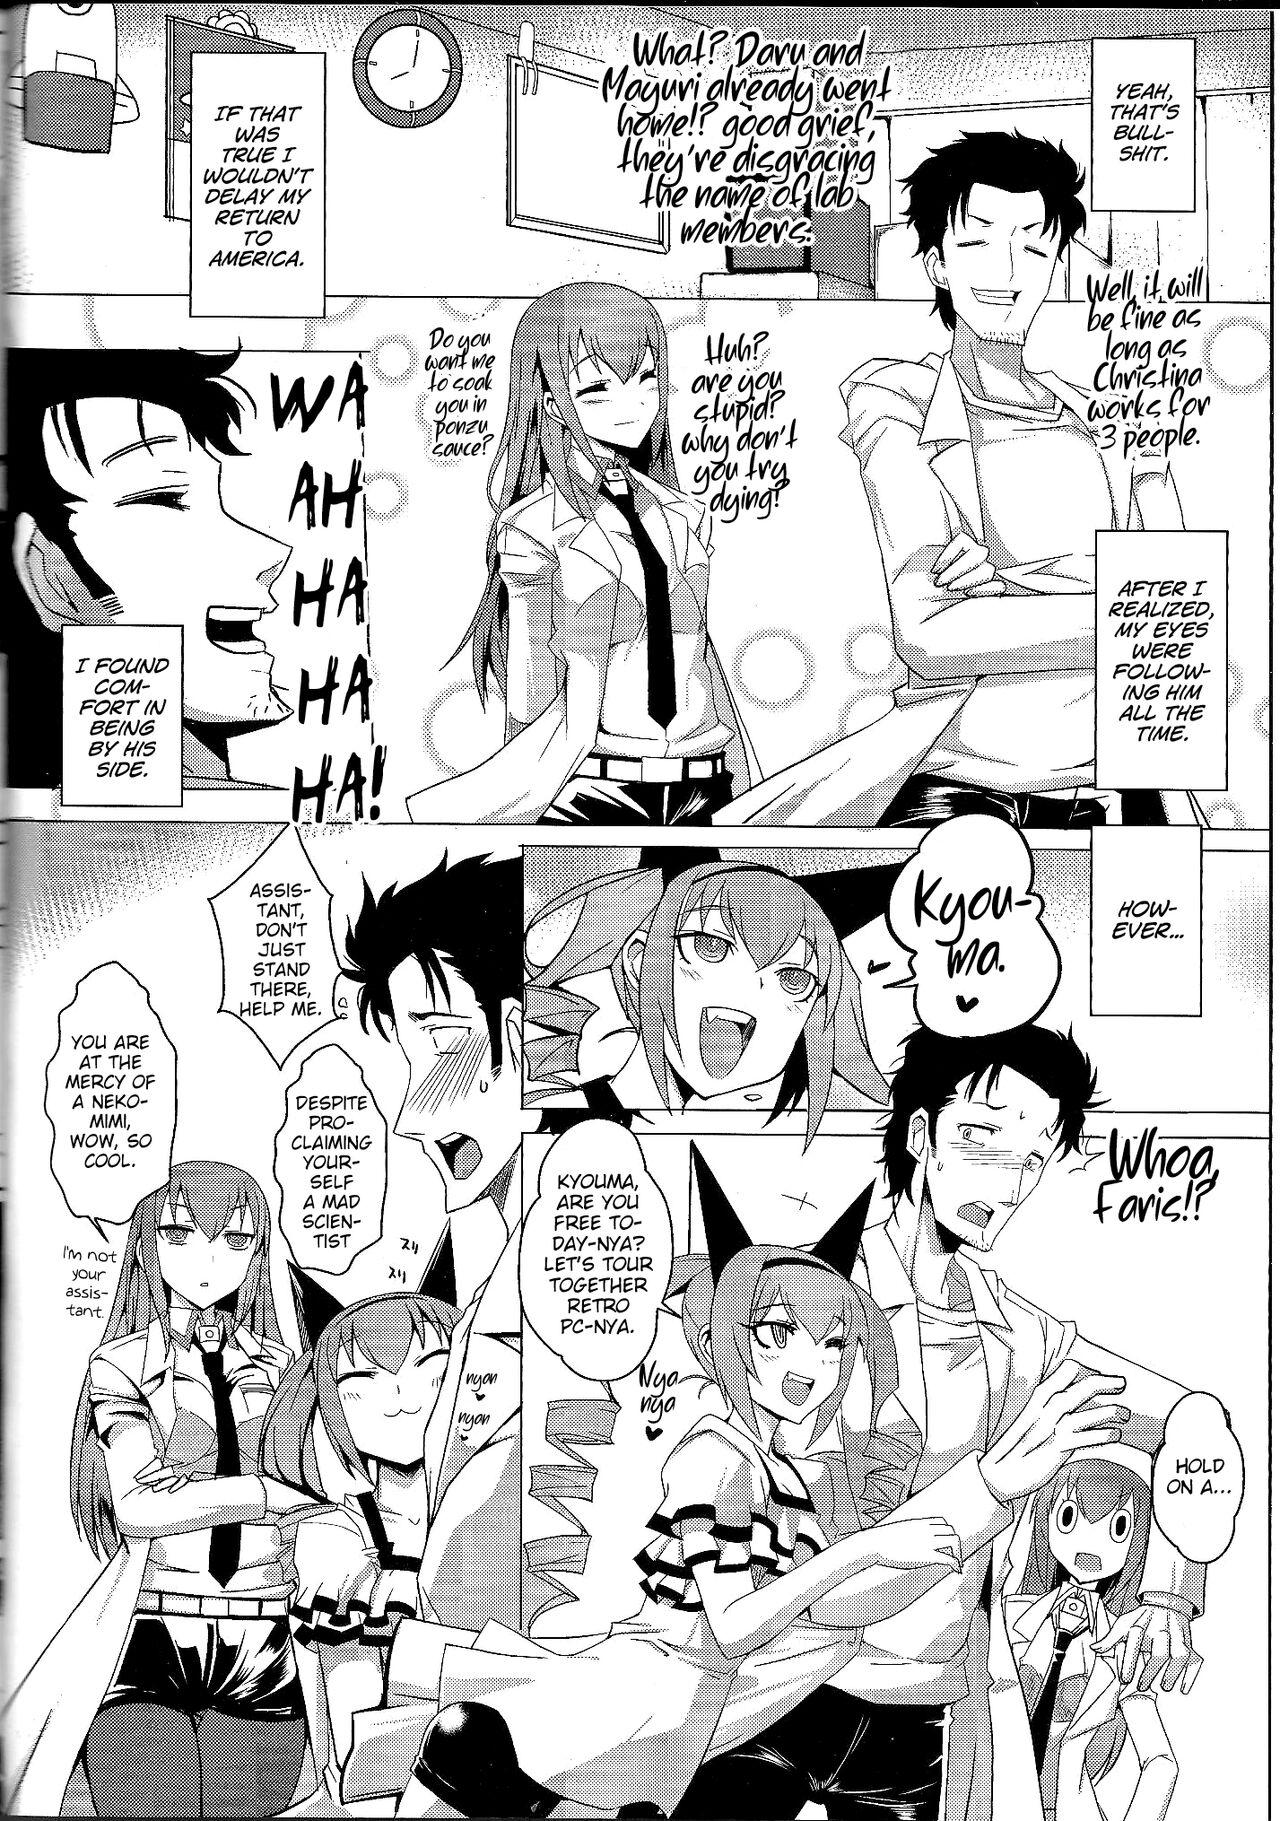 Cuckolding Kenjin Chijou no Sodoministers - Steinsgate Job - Page 5